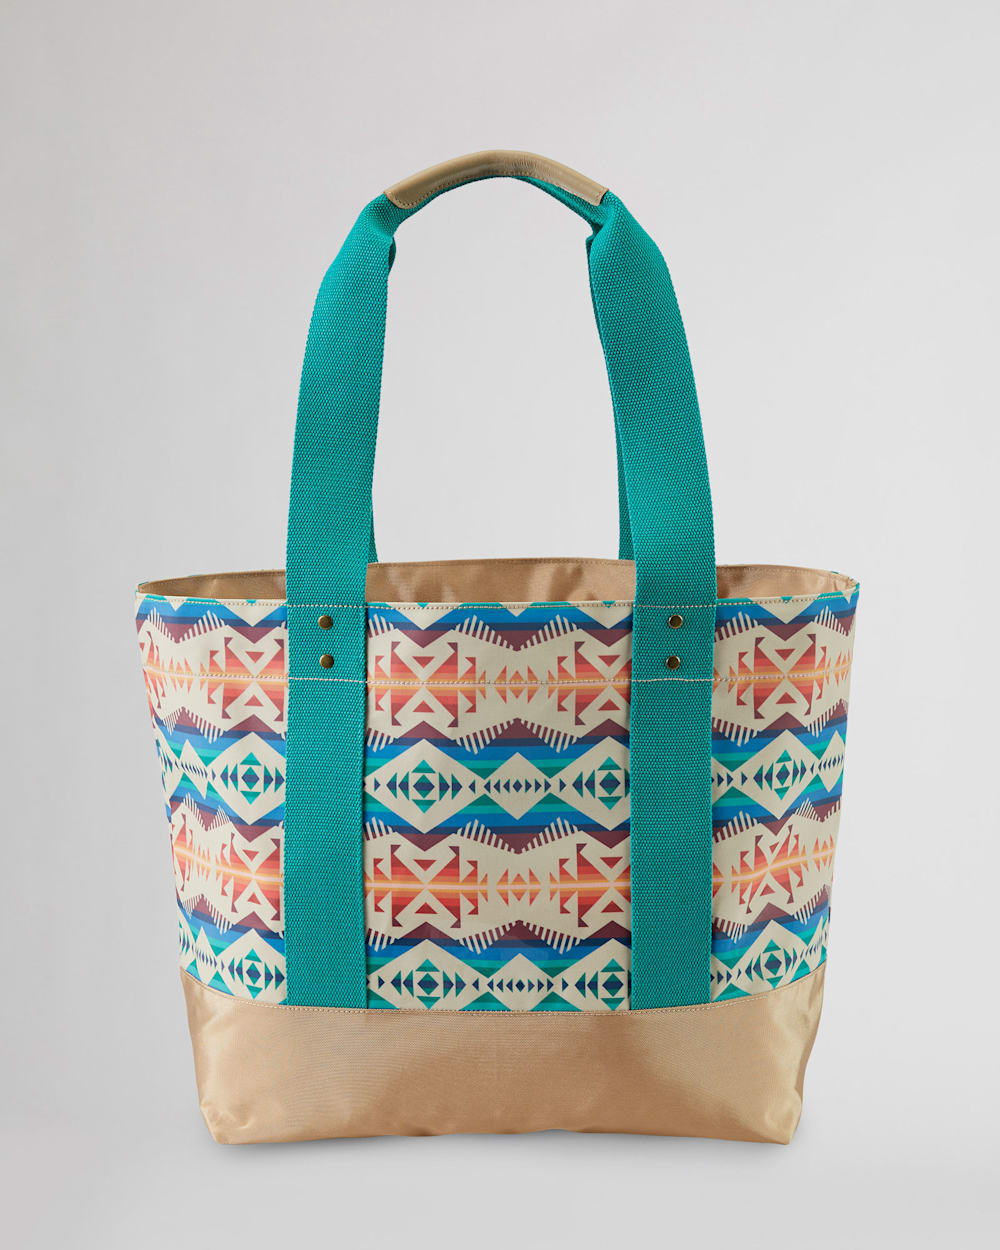 ALTERNATE VIEW OF LOS LUNAS CANOPY CANVAS TOTE IN TAN MULTI image number 2